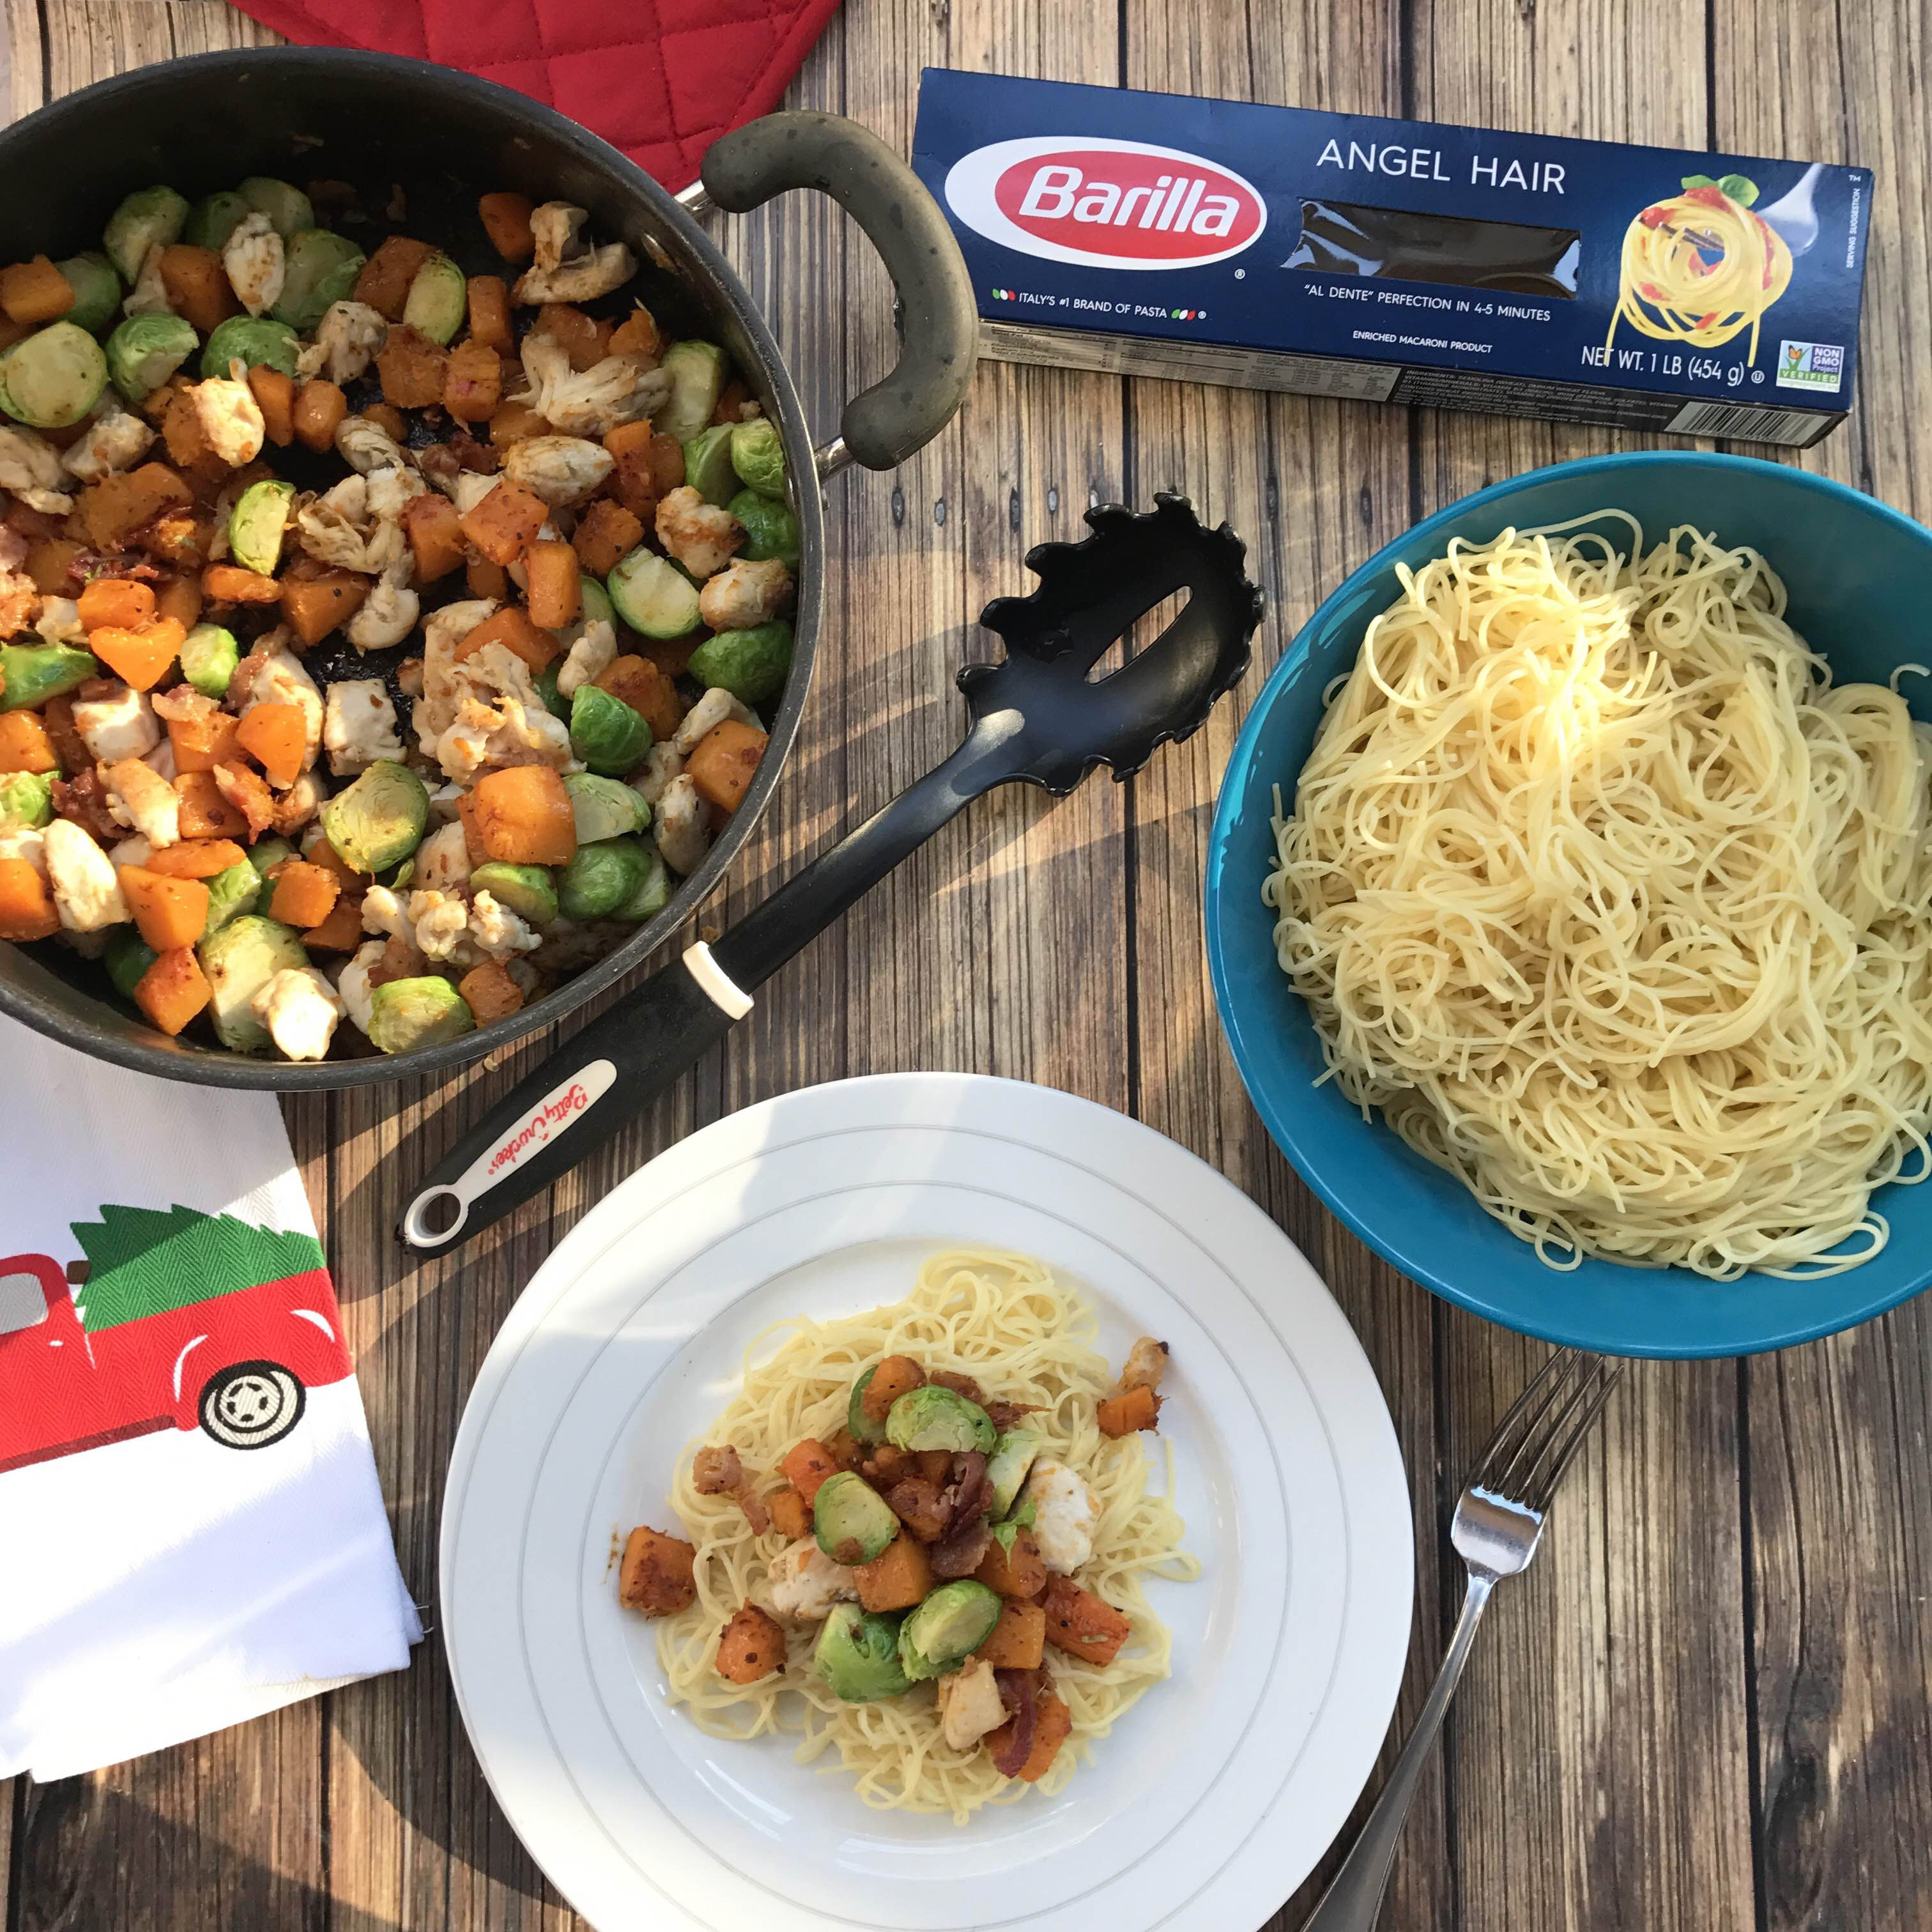 Maple butternut squash and chicken pasta | Angel hair with squash and brussels sprouts | Brussels sprouts and squash over pasta | Easy winter pasta recipes | GinaKirk.com @ginaekirk